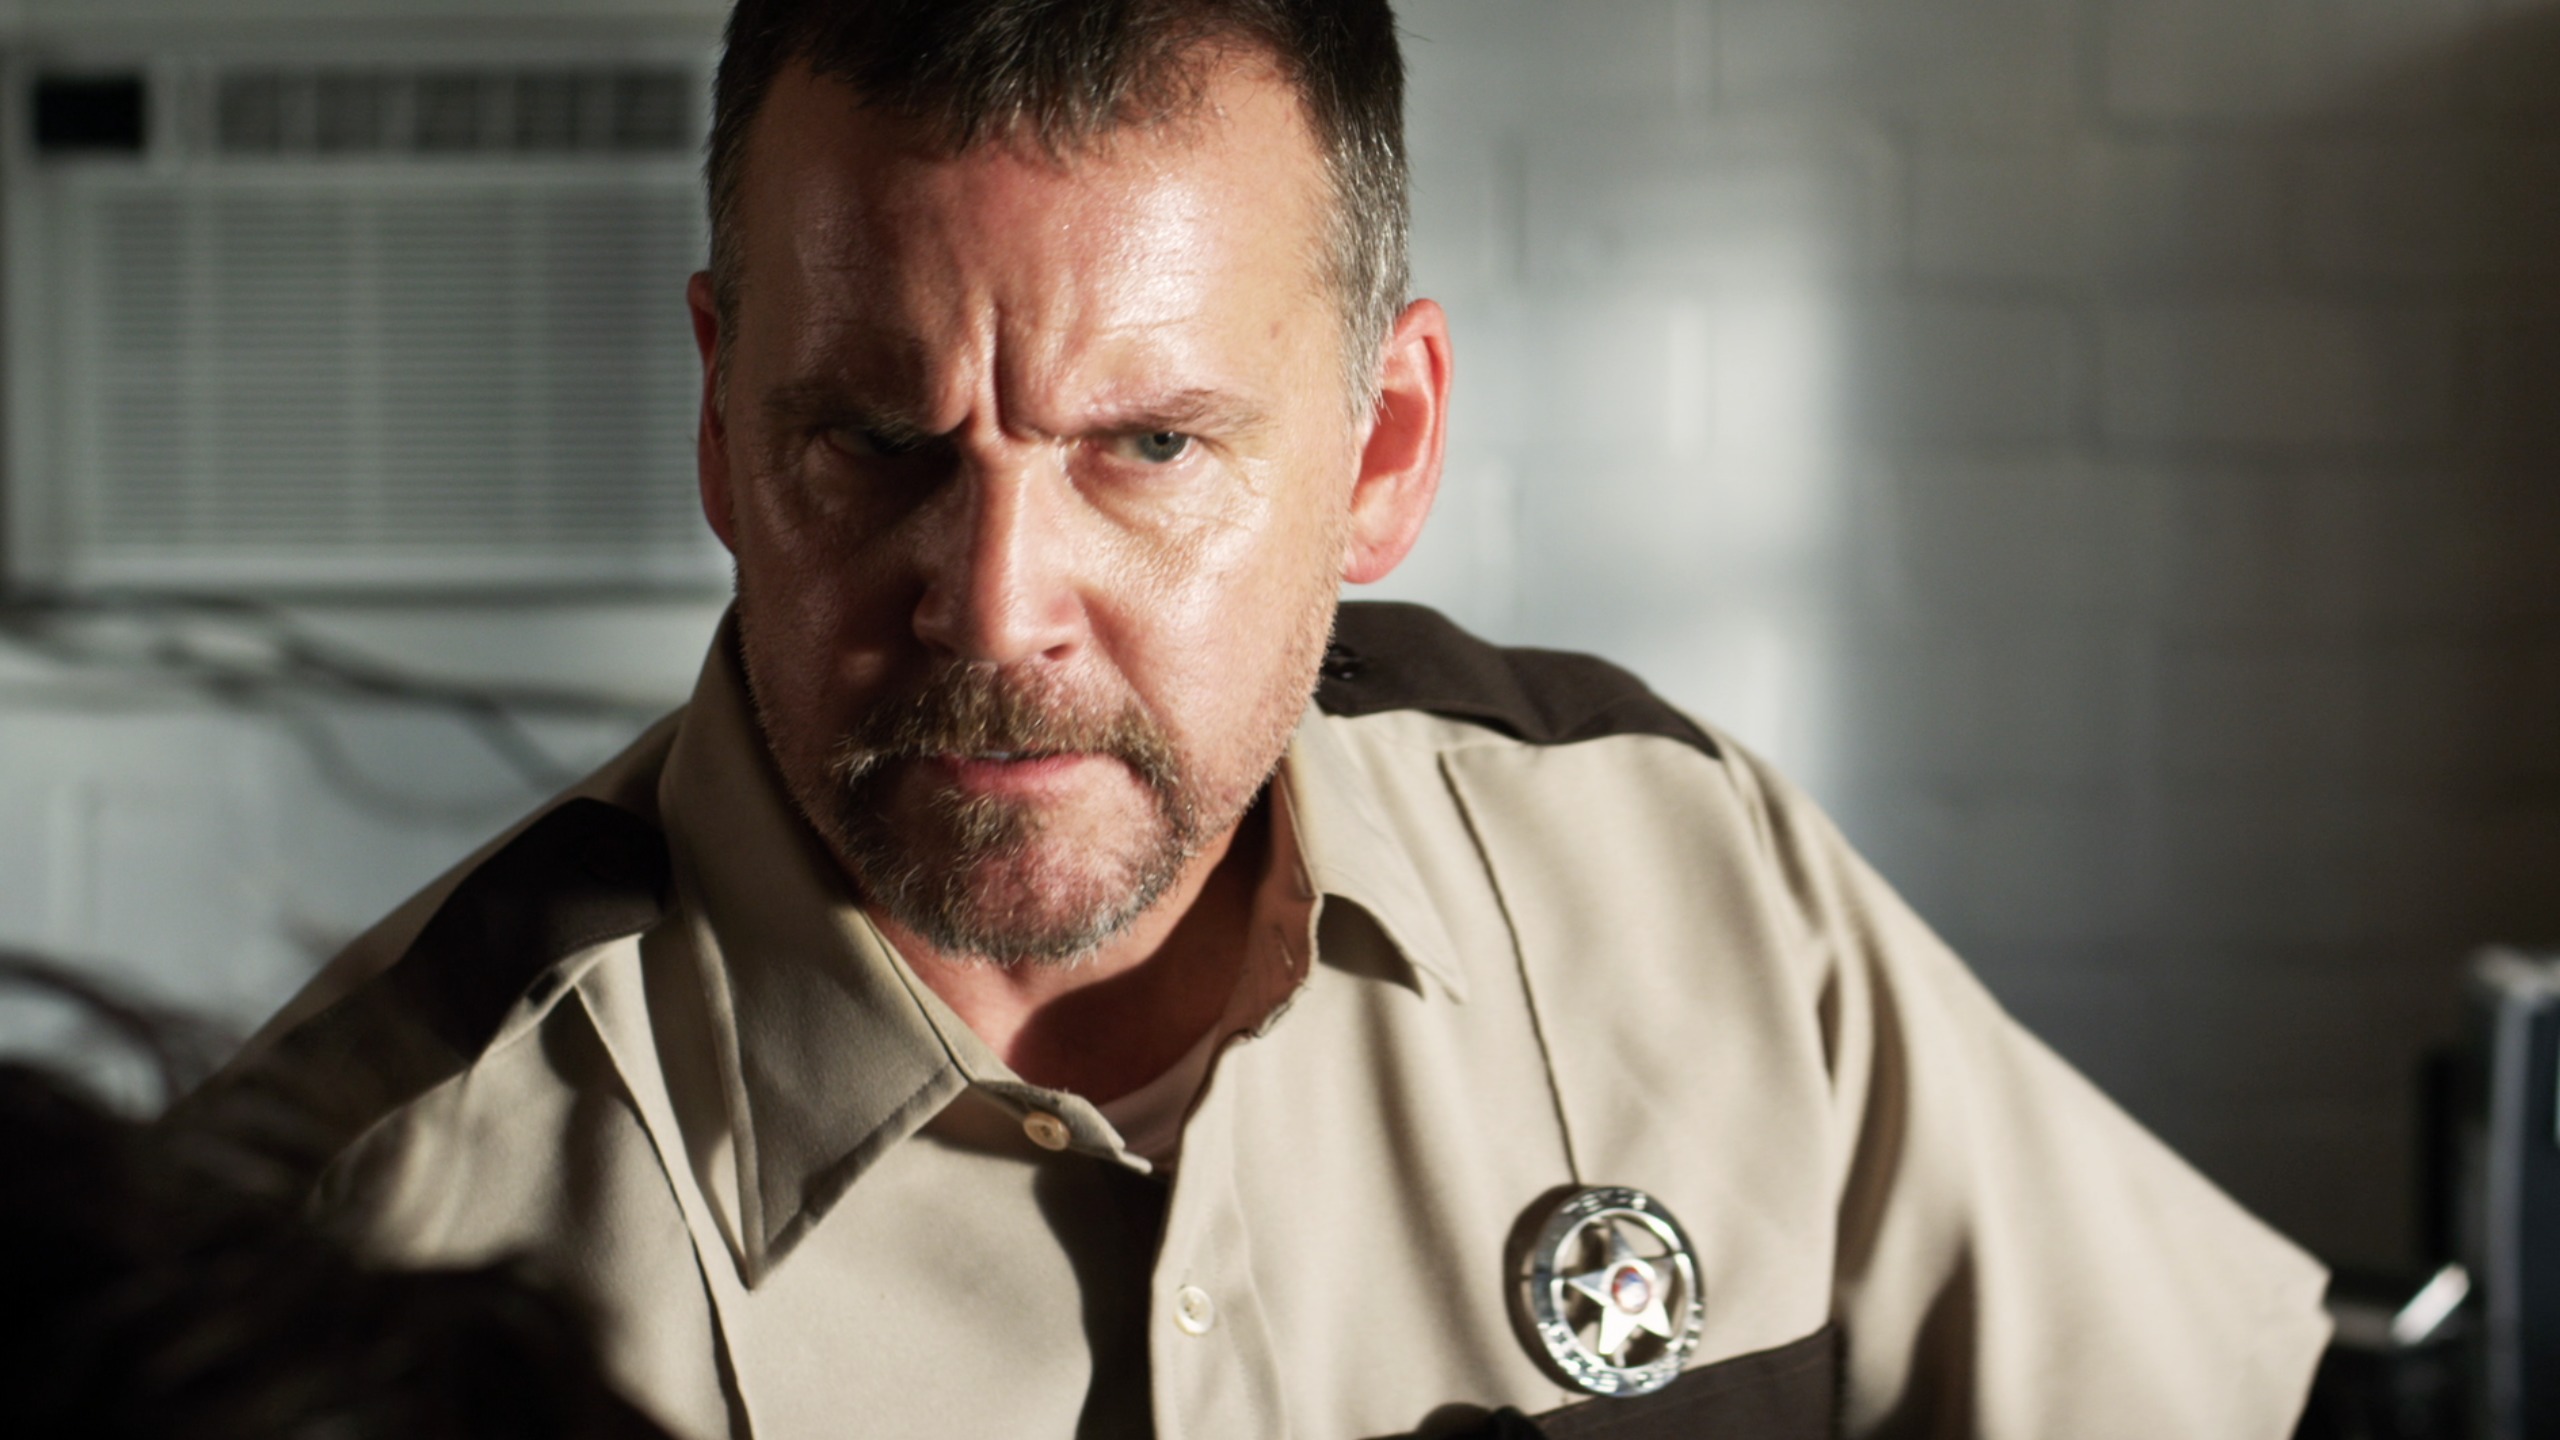 Still of Brent Anderson as Sheriff Joe Cain in GALLOWS ROAD